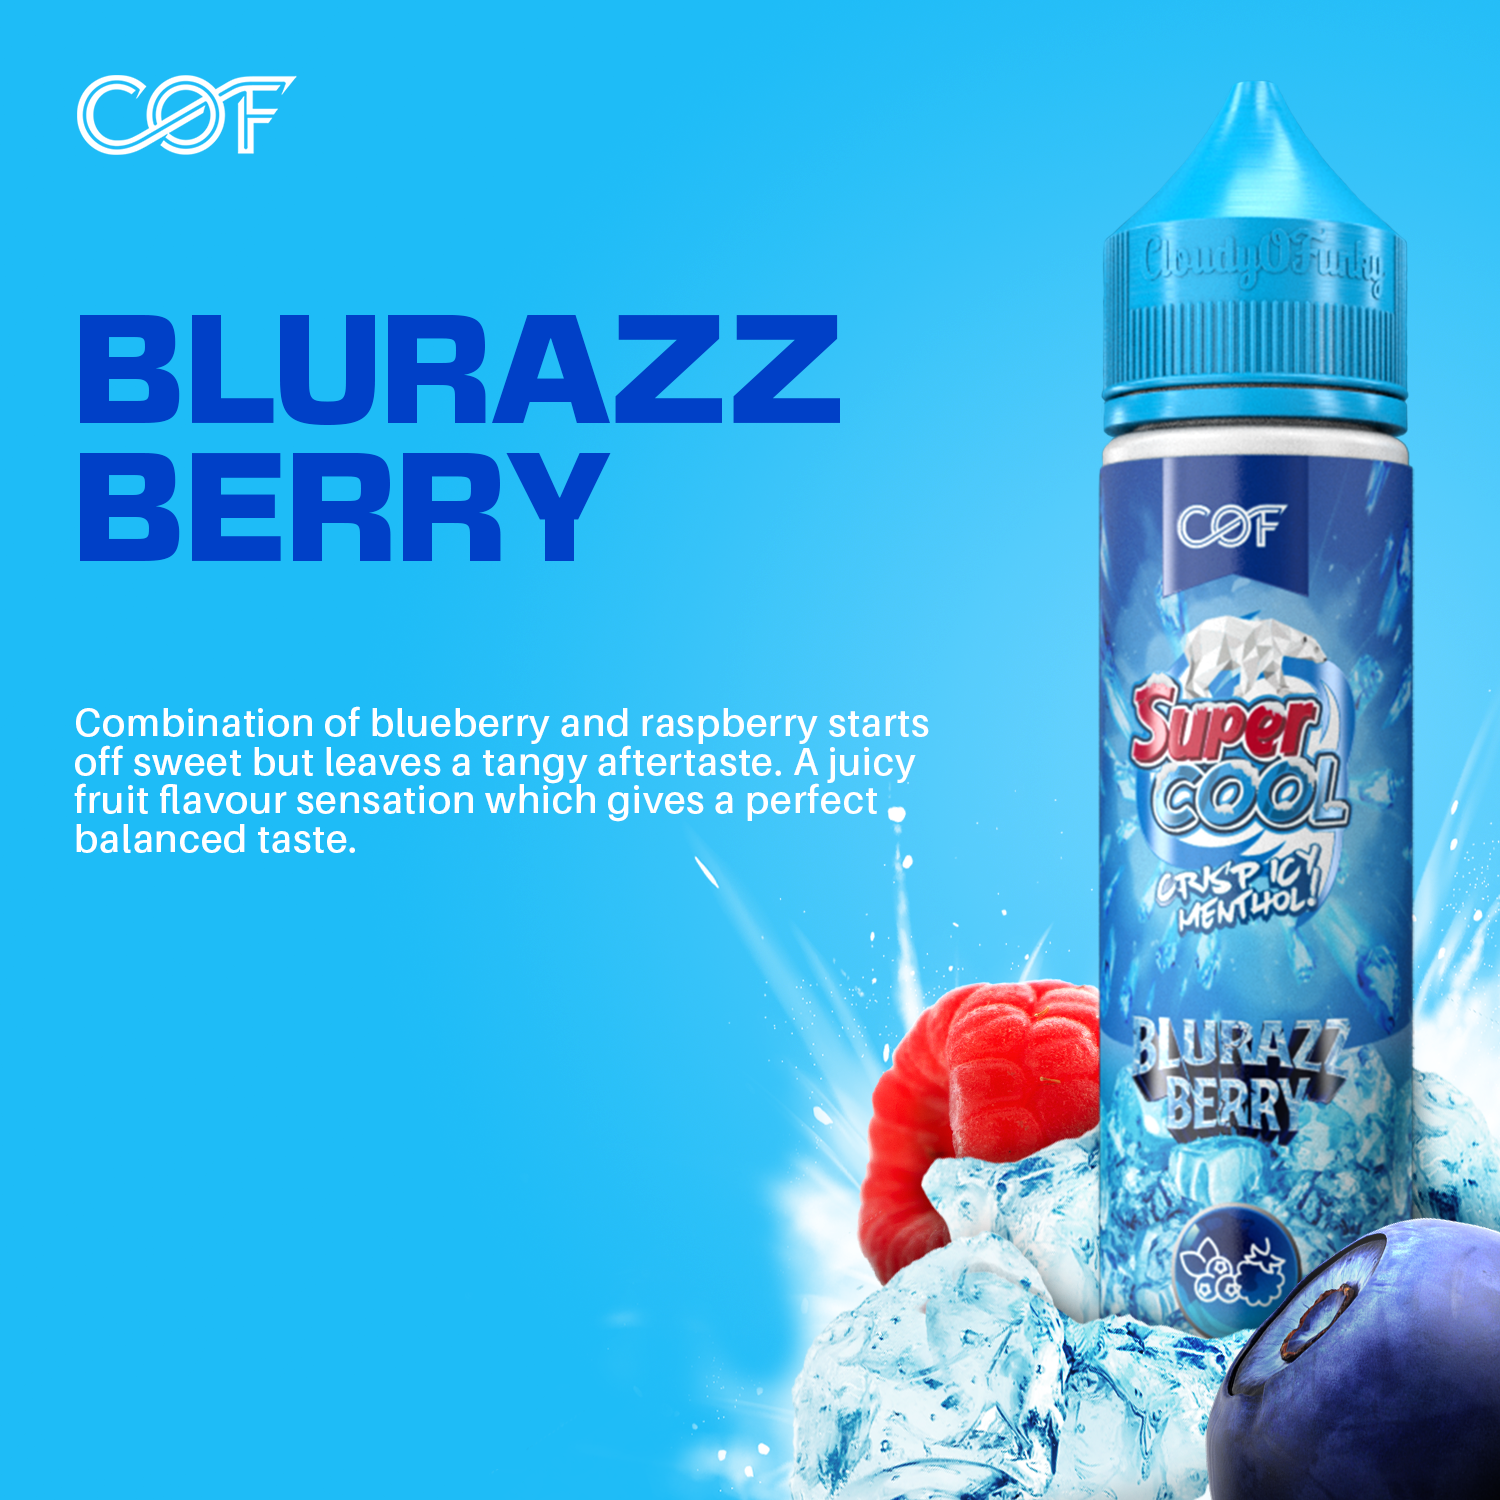 Cloud Of Funky Super Cool Series - Bluerazz Berry